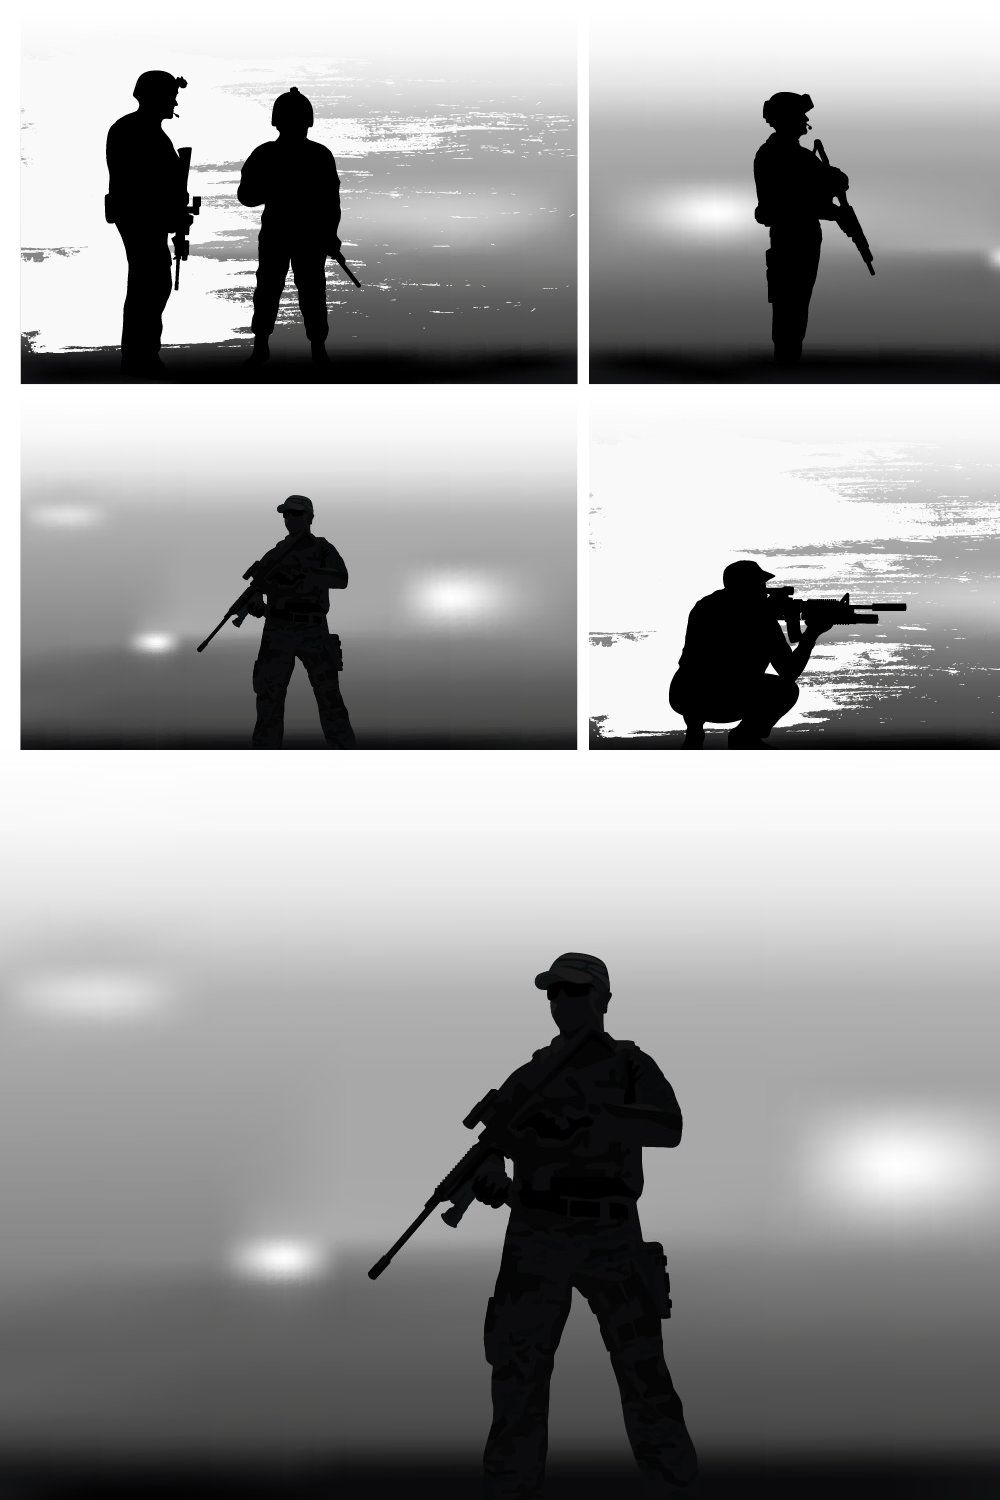 Set of images on a military theme. pinterest preview image.